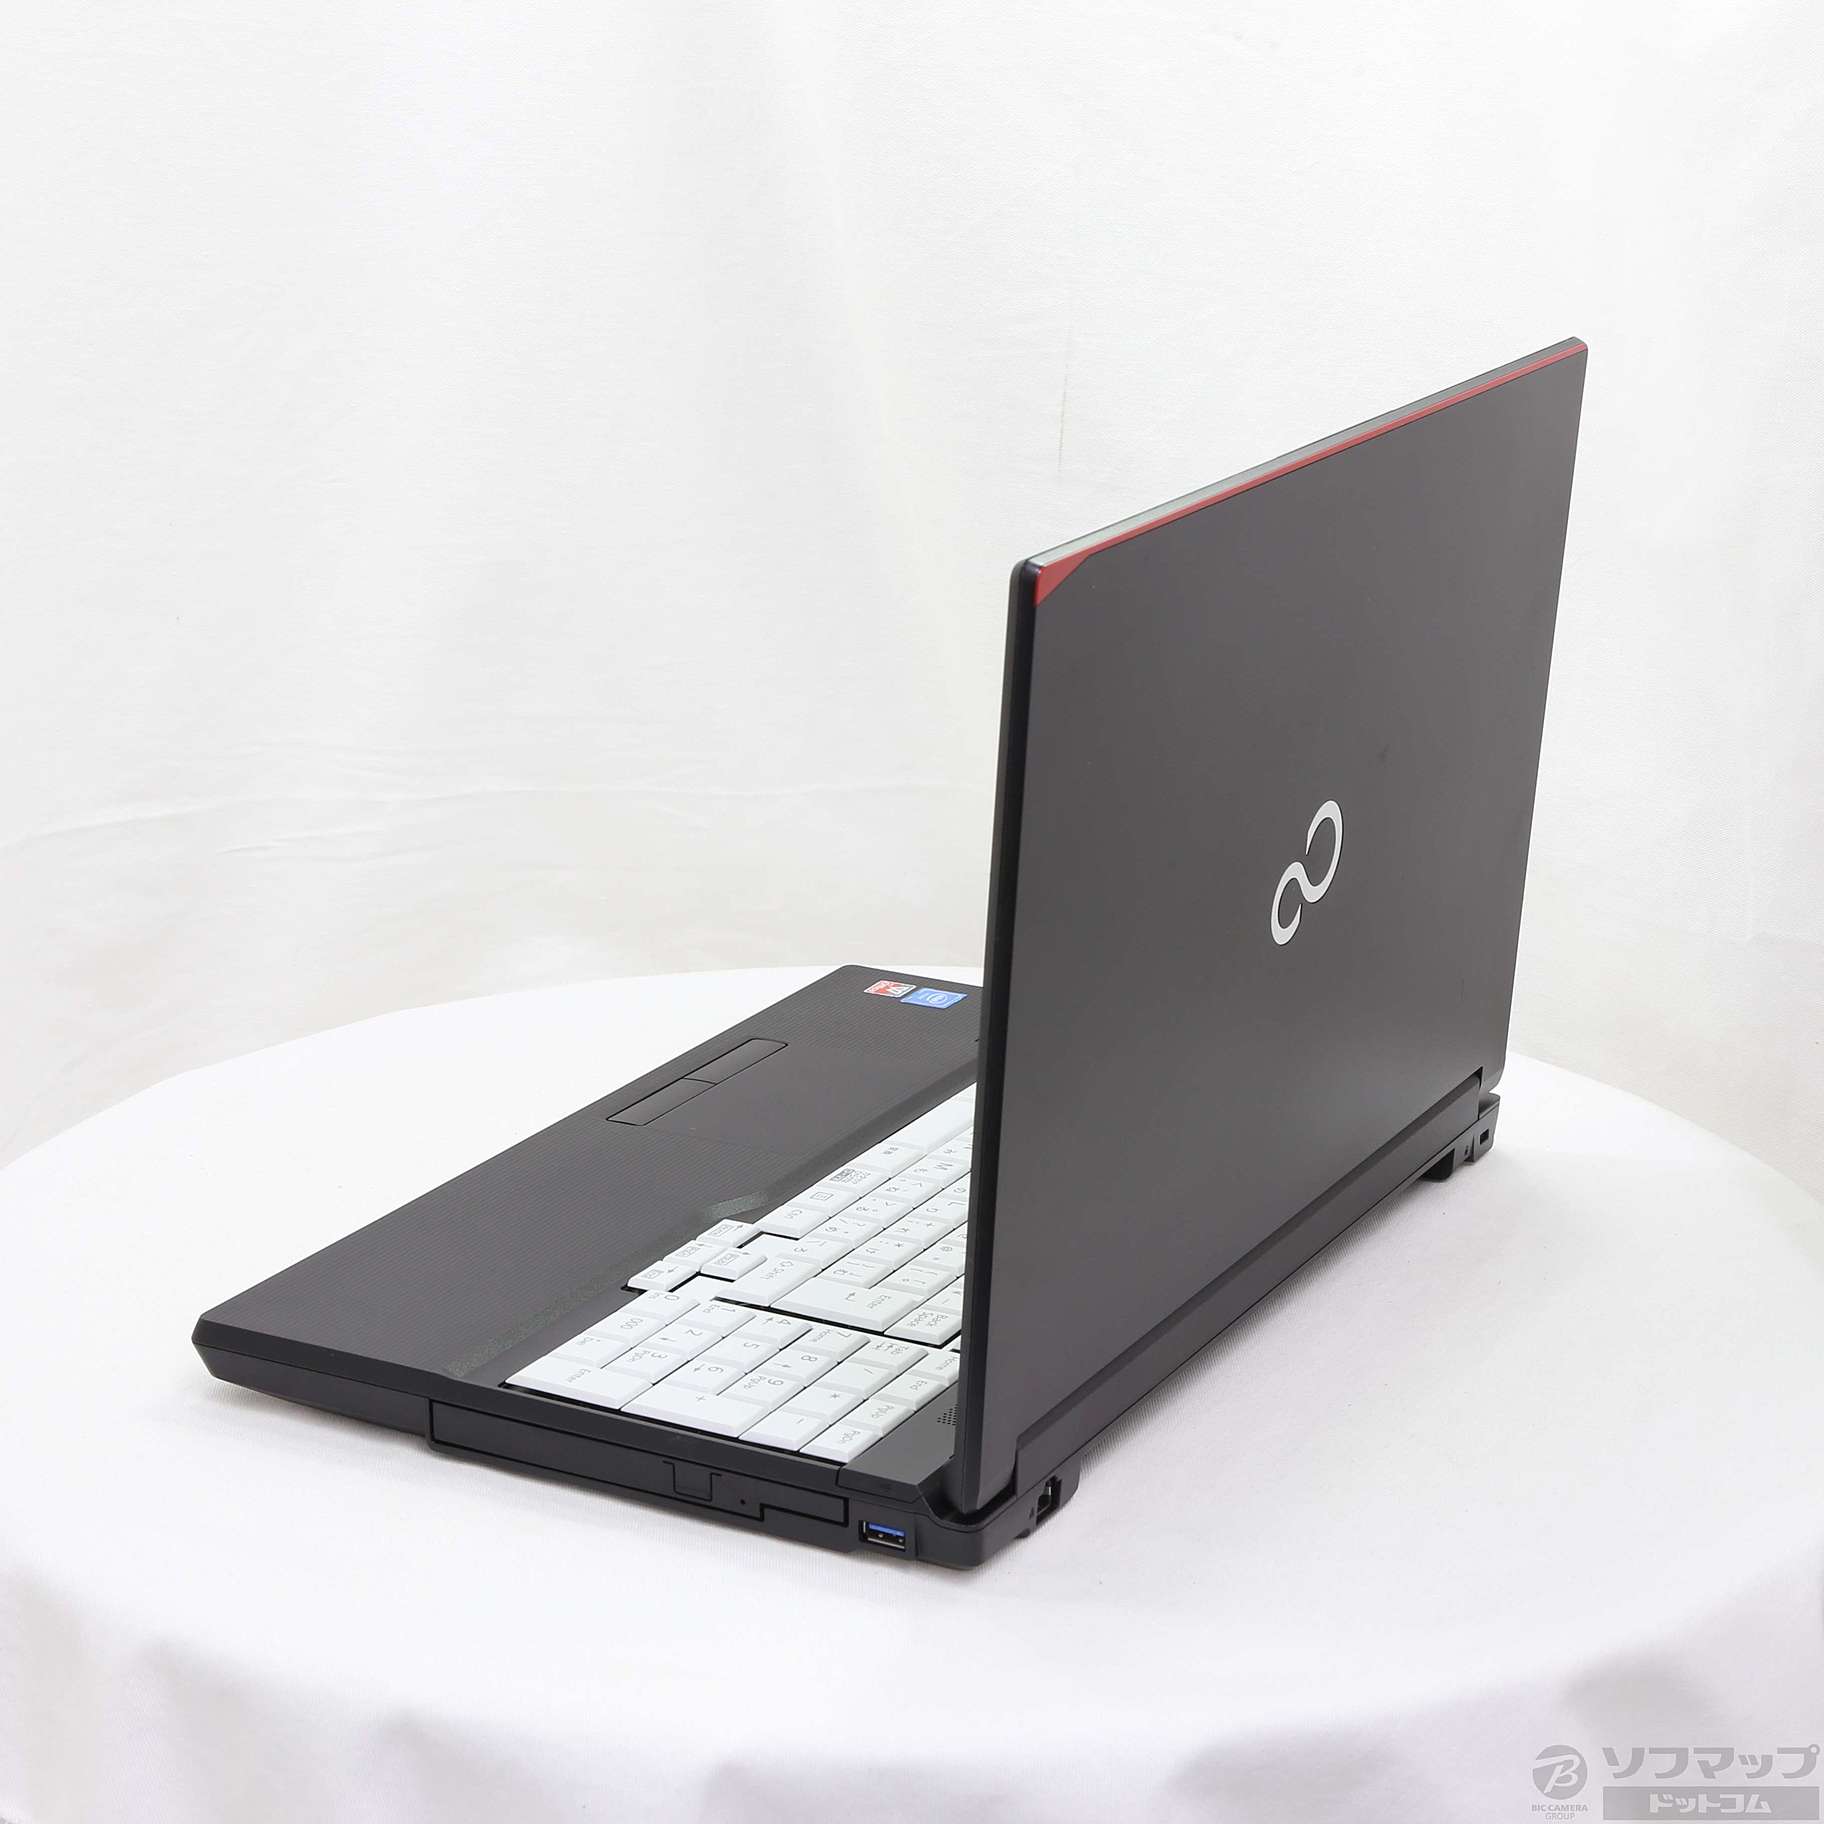 LIFEBOOK A576／PX FMVA1603FP